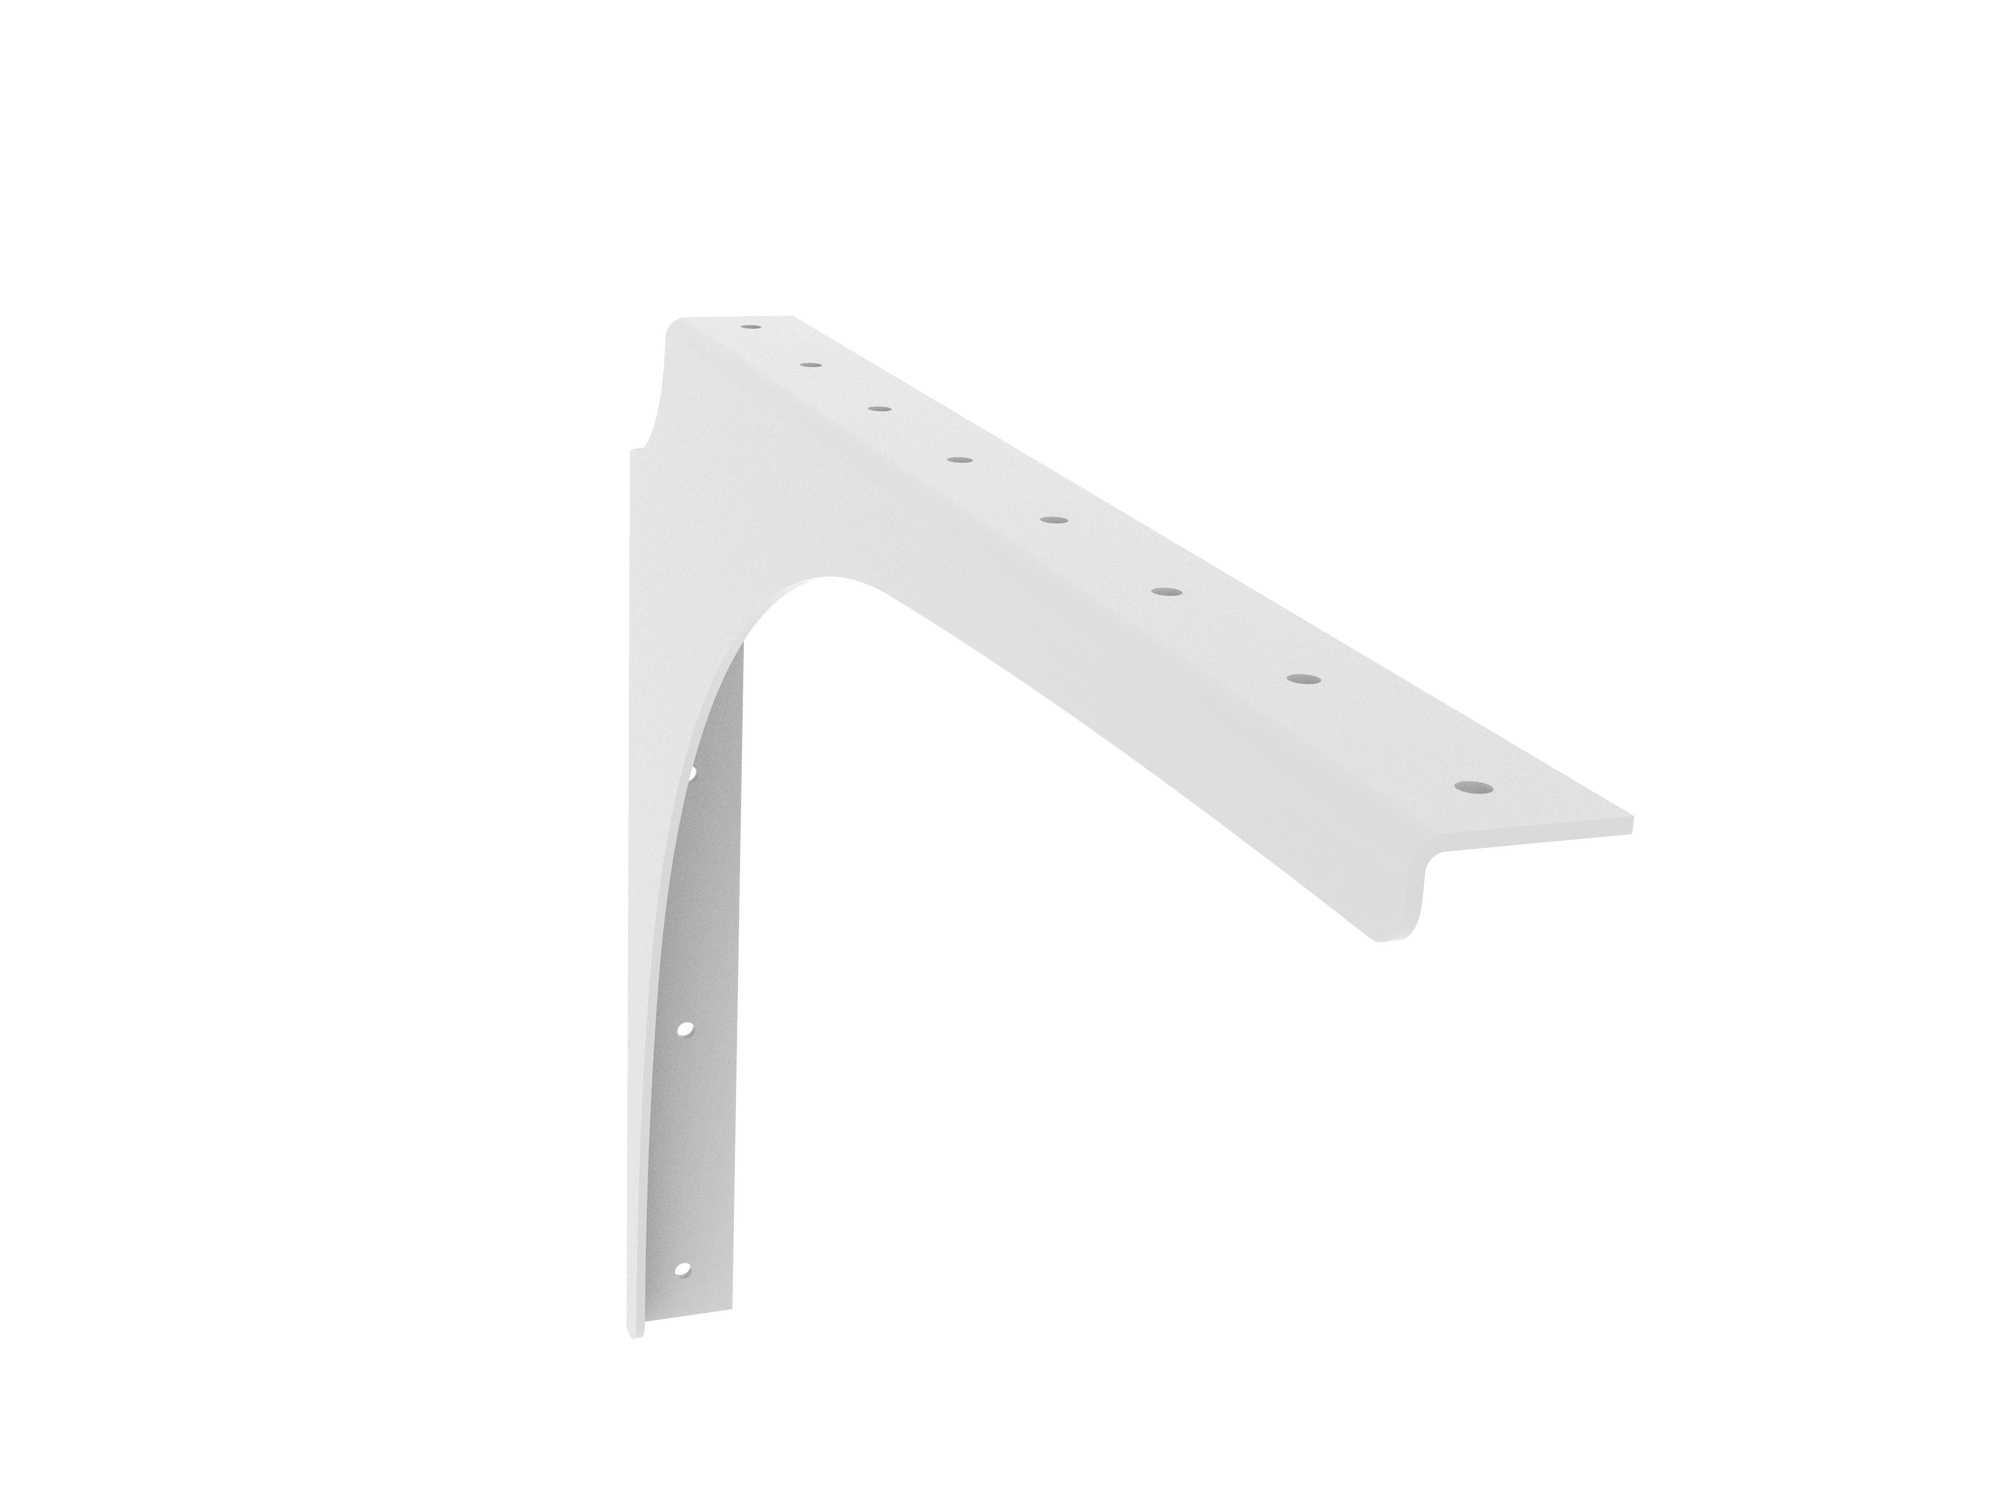 Universal Commercial Support Bracket - 21" x 15" with White Powder Coat Finish. Supports floating ADA-compliant vanities, desks, shelving, countertops, and more.